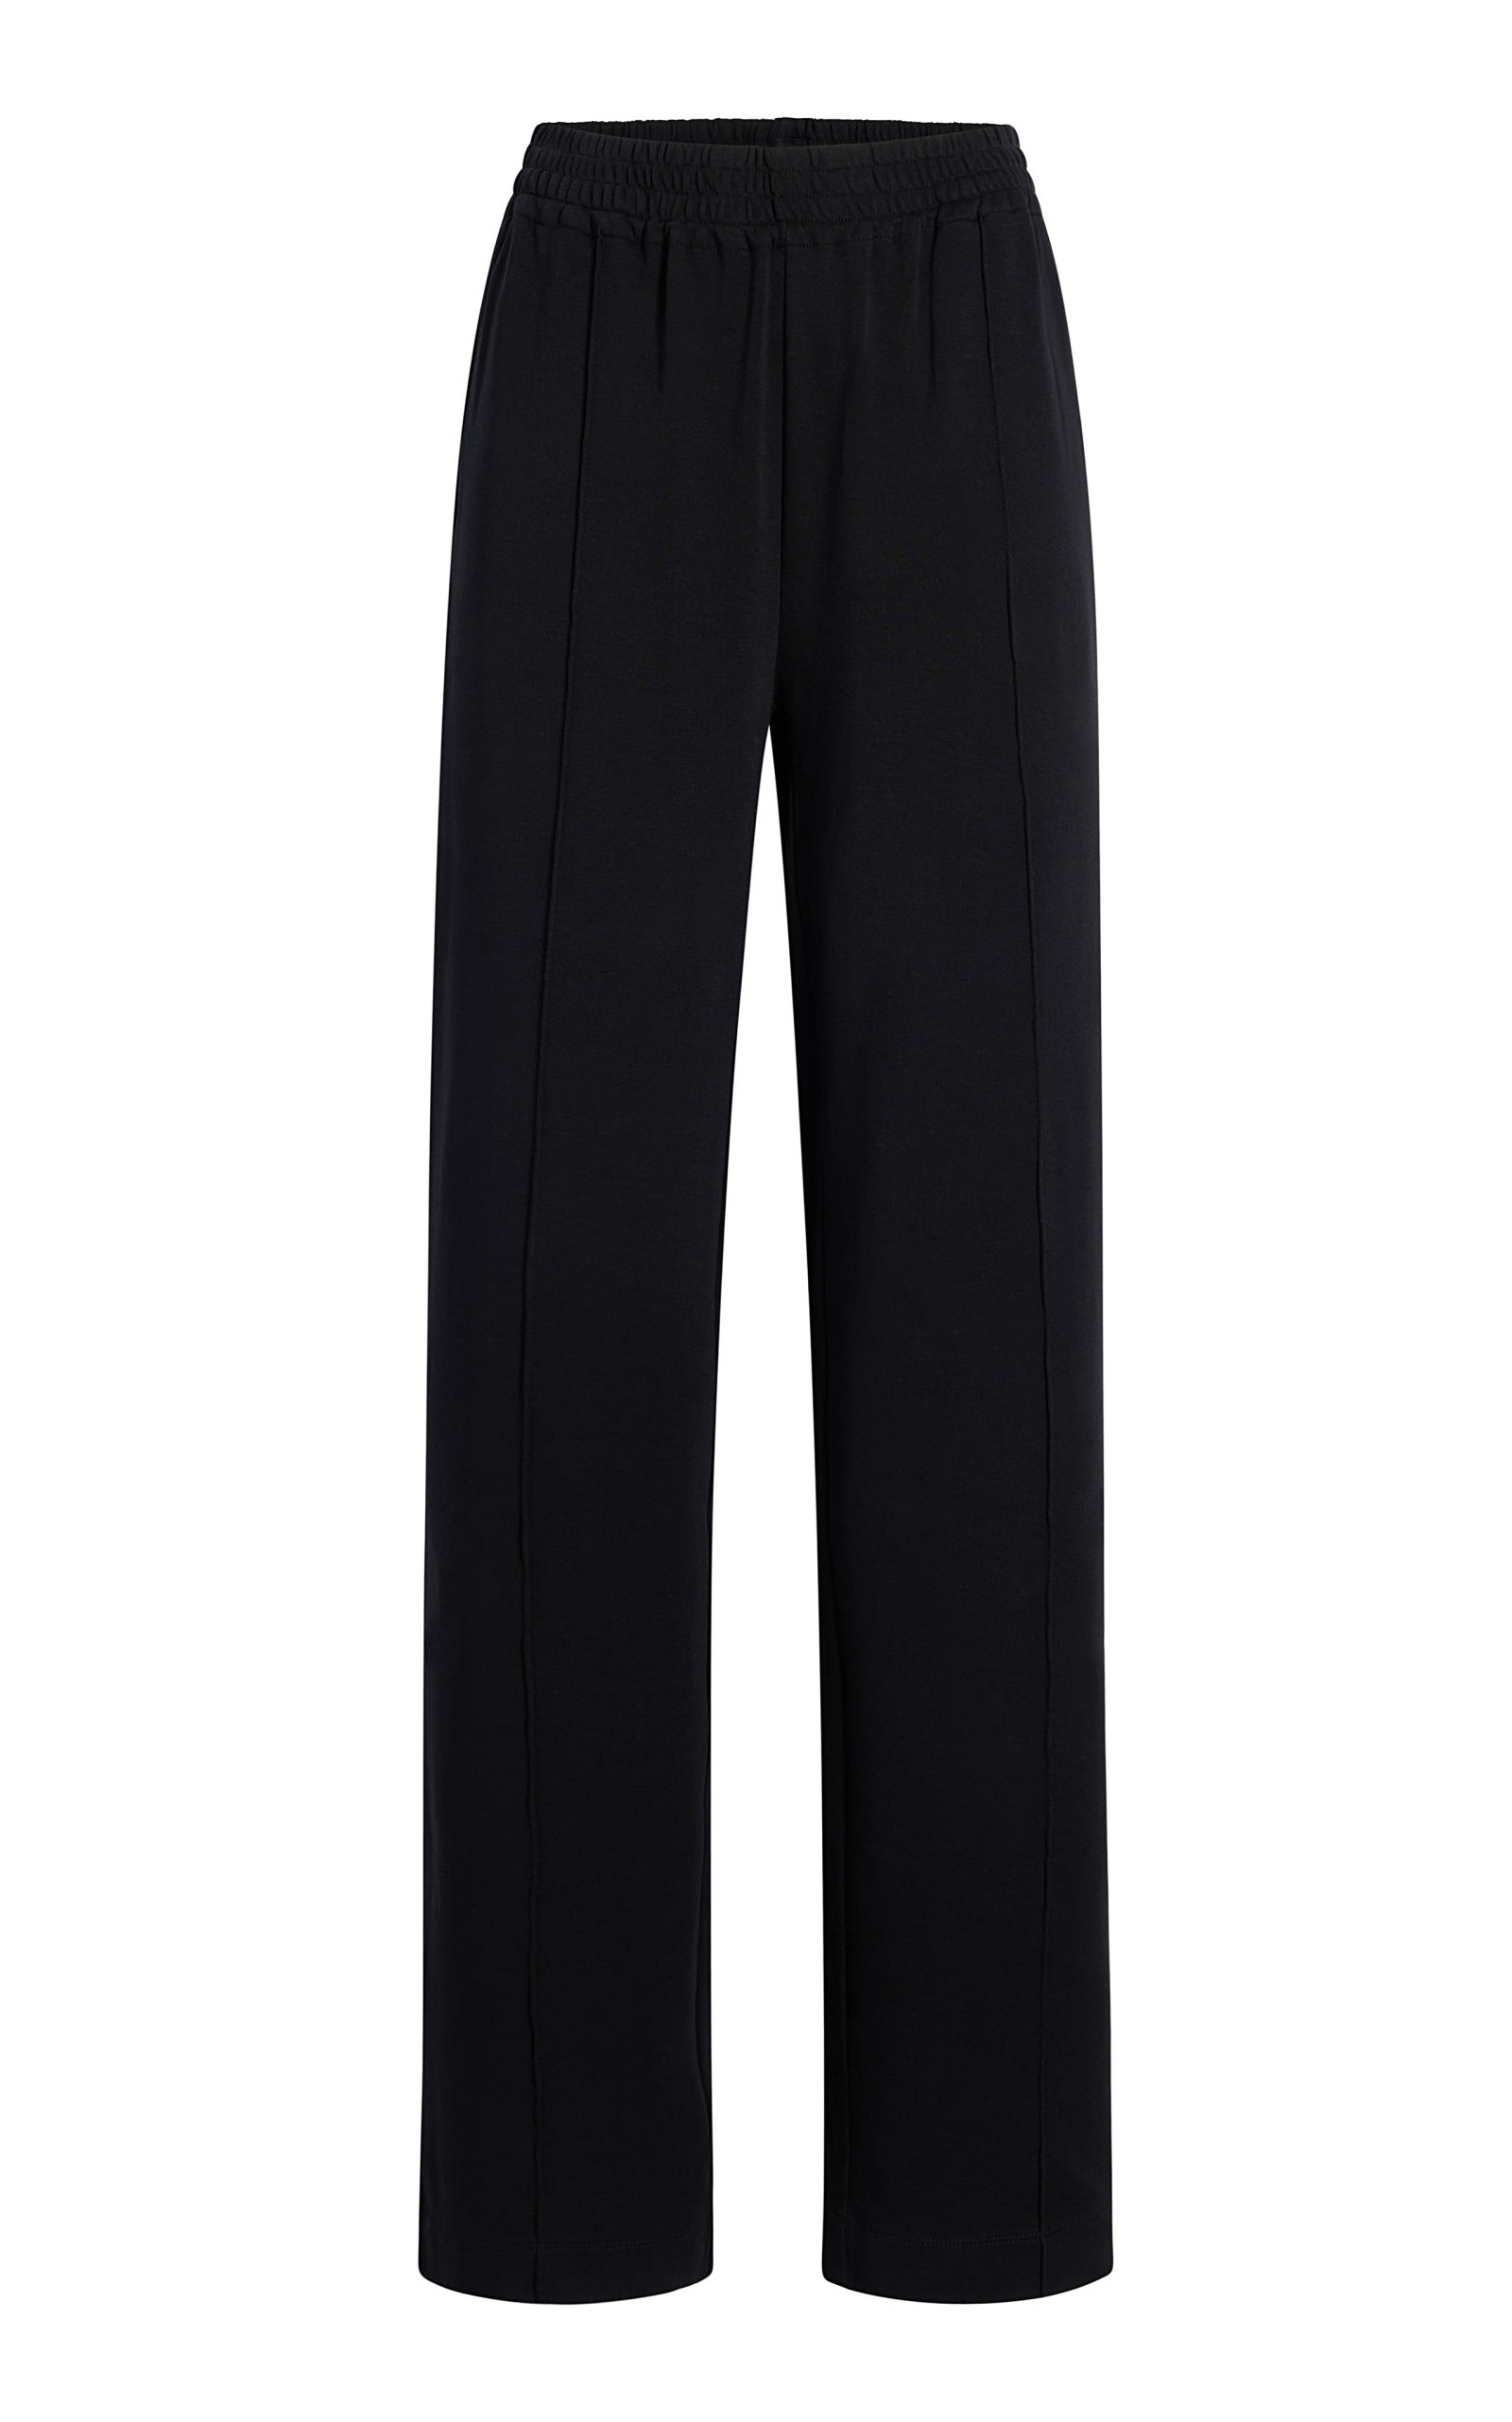 LUXE SEAMED LOUNGE PANT BLACK A123CT038-CO-BLK